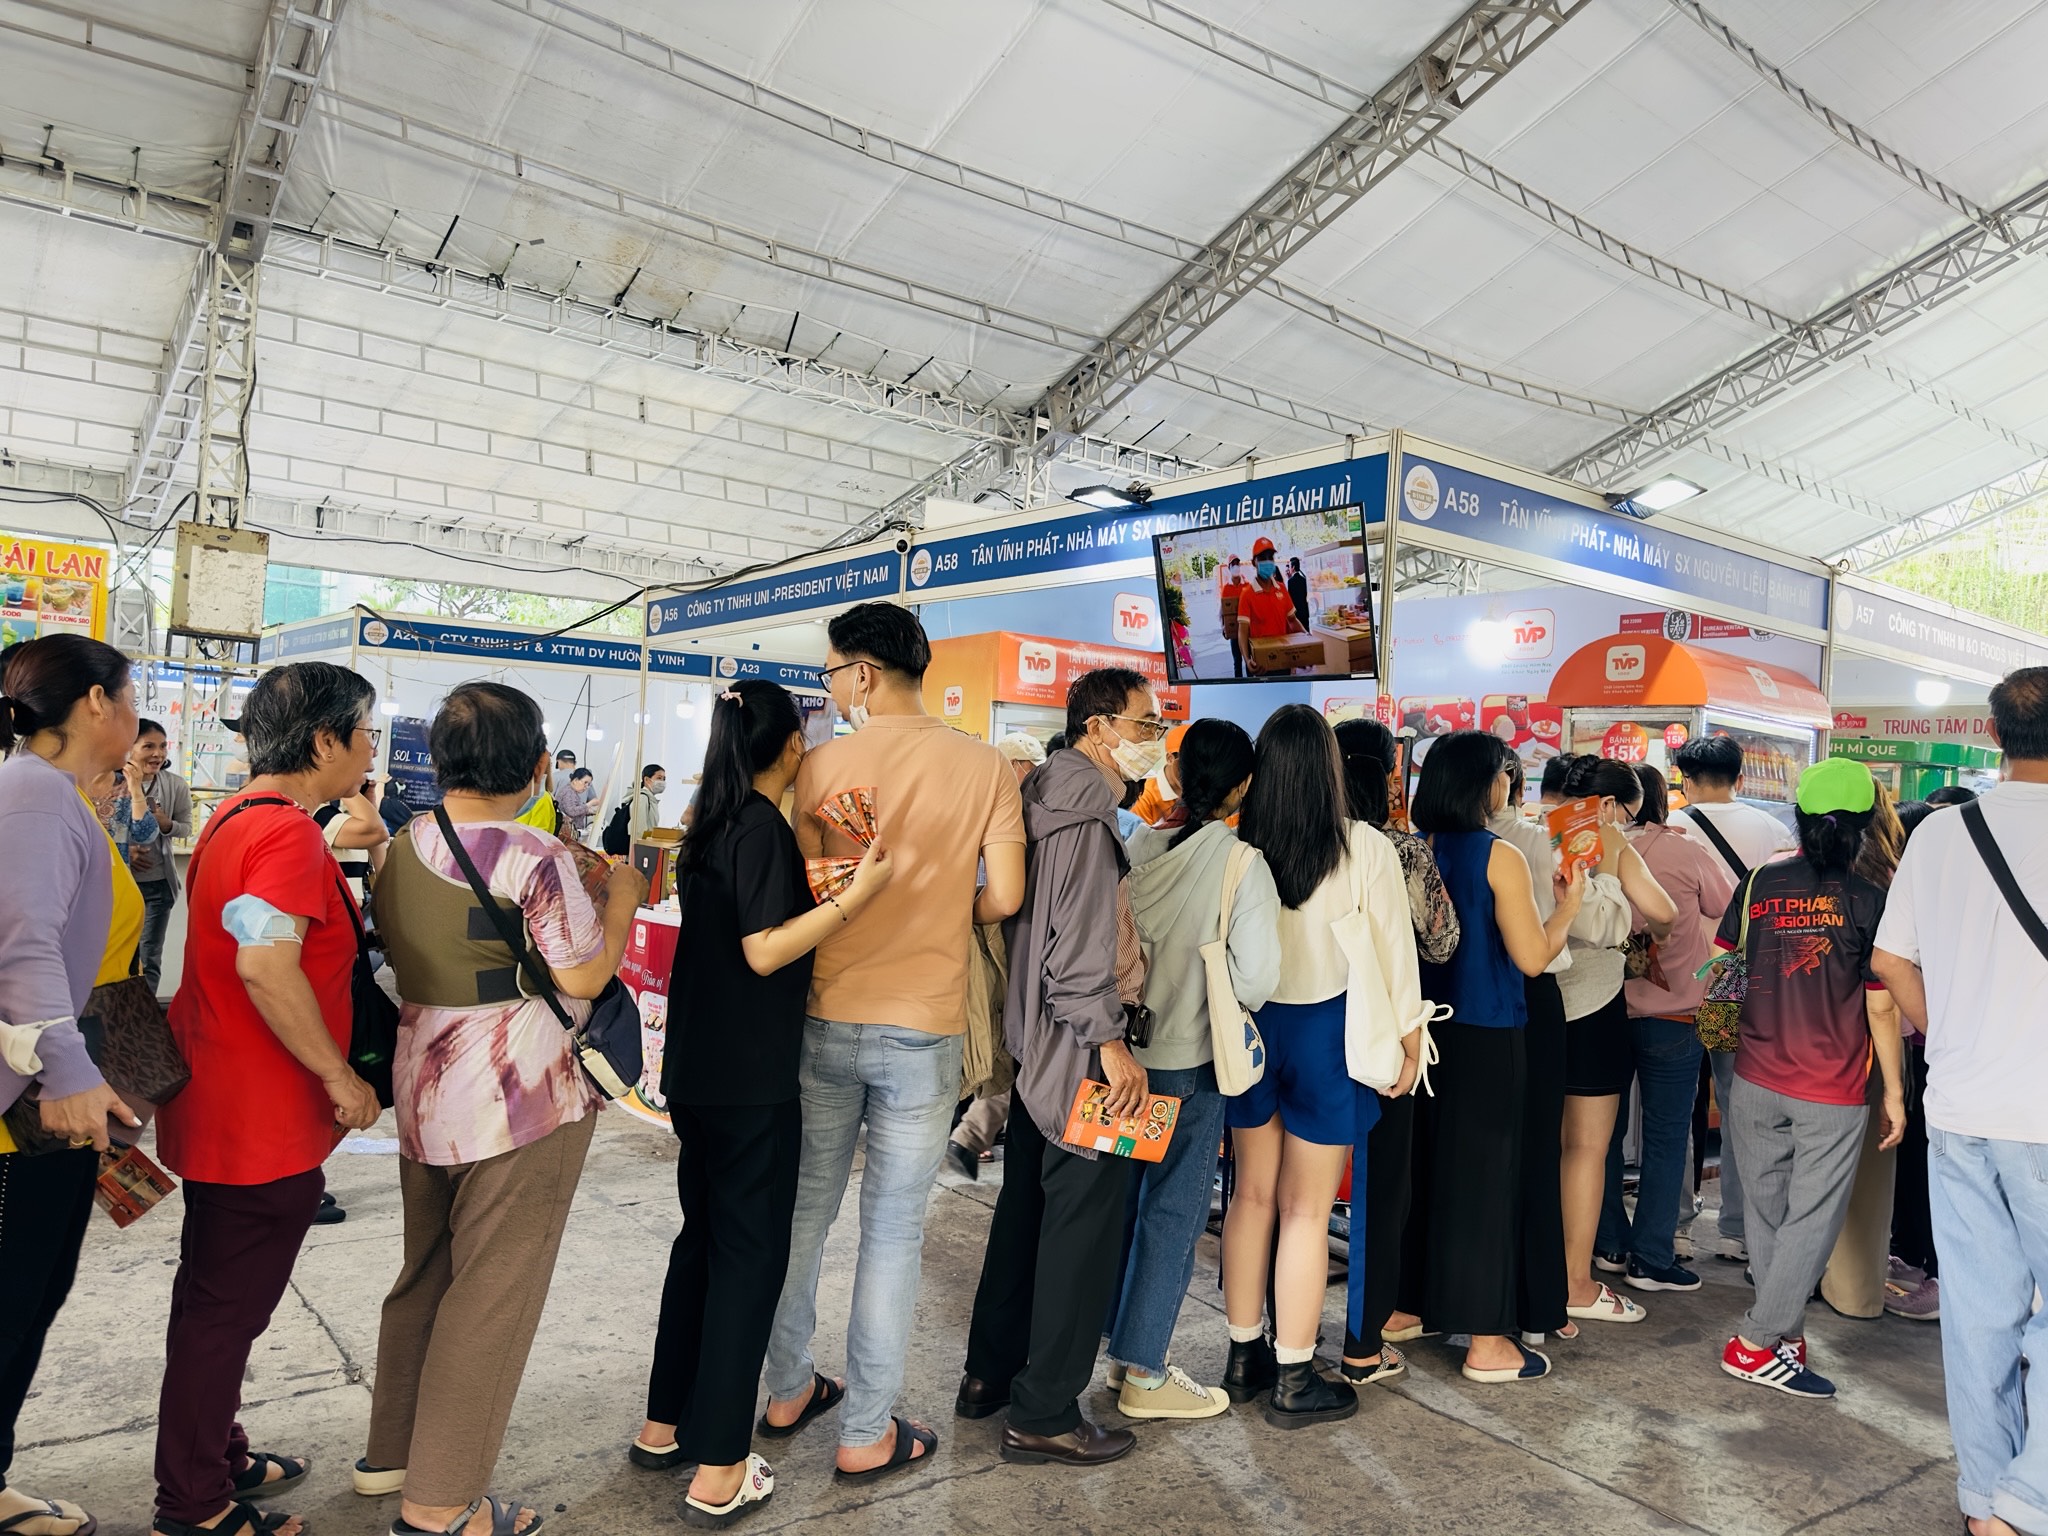 Revelers line up to buy banh mi at a booth. Photo: Tieu Bac / Tuoi Tre News